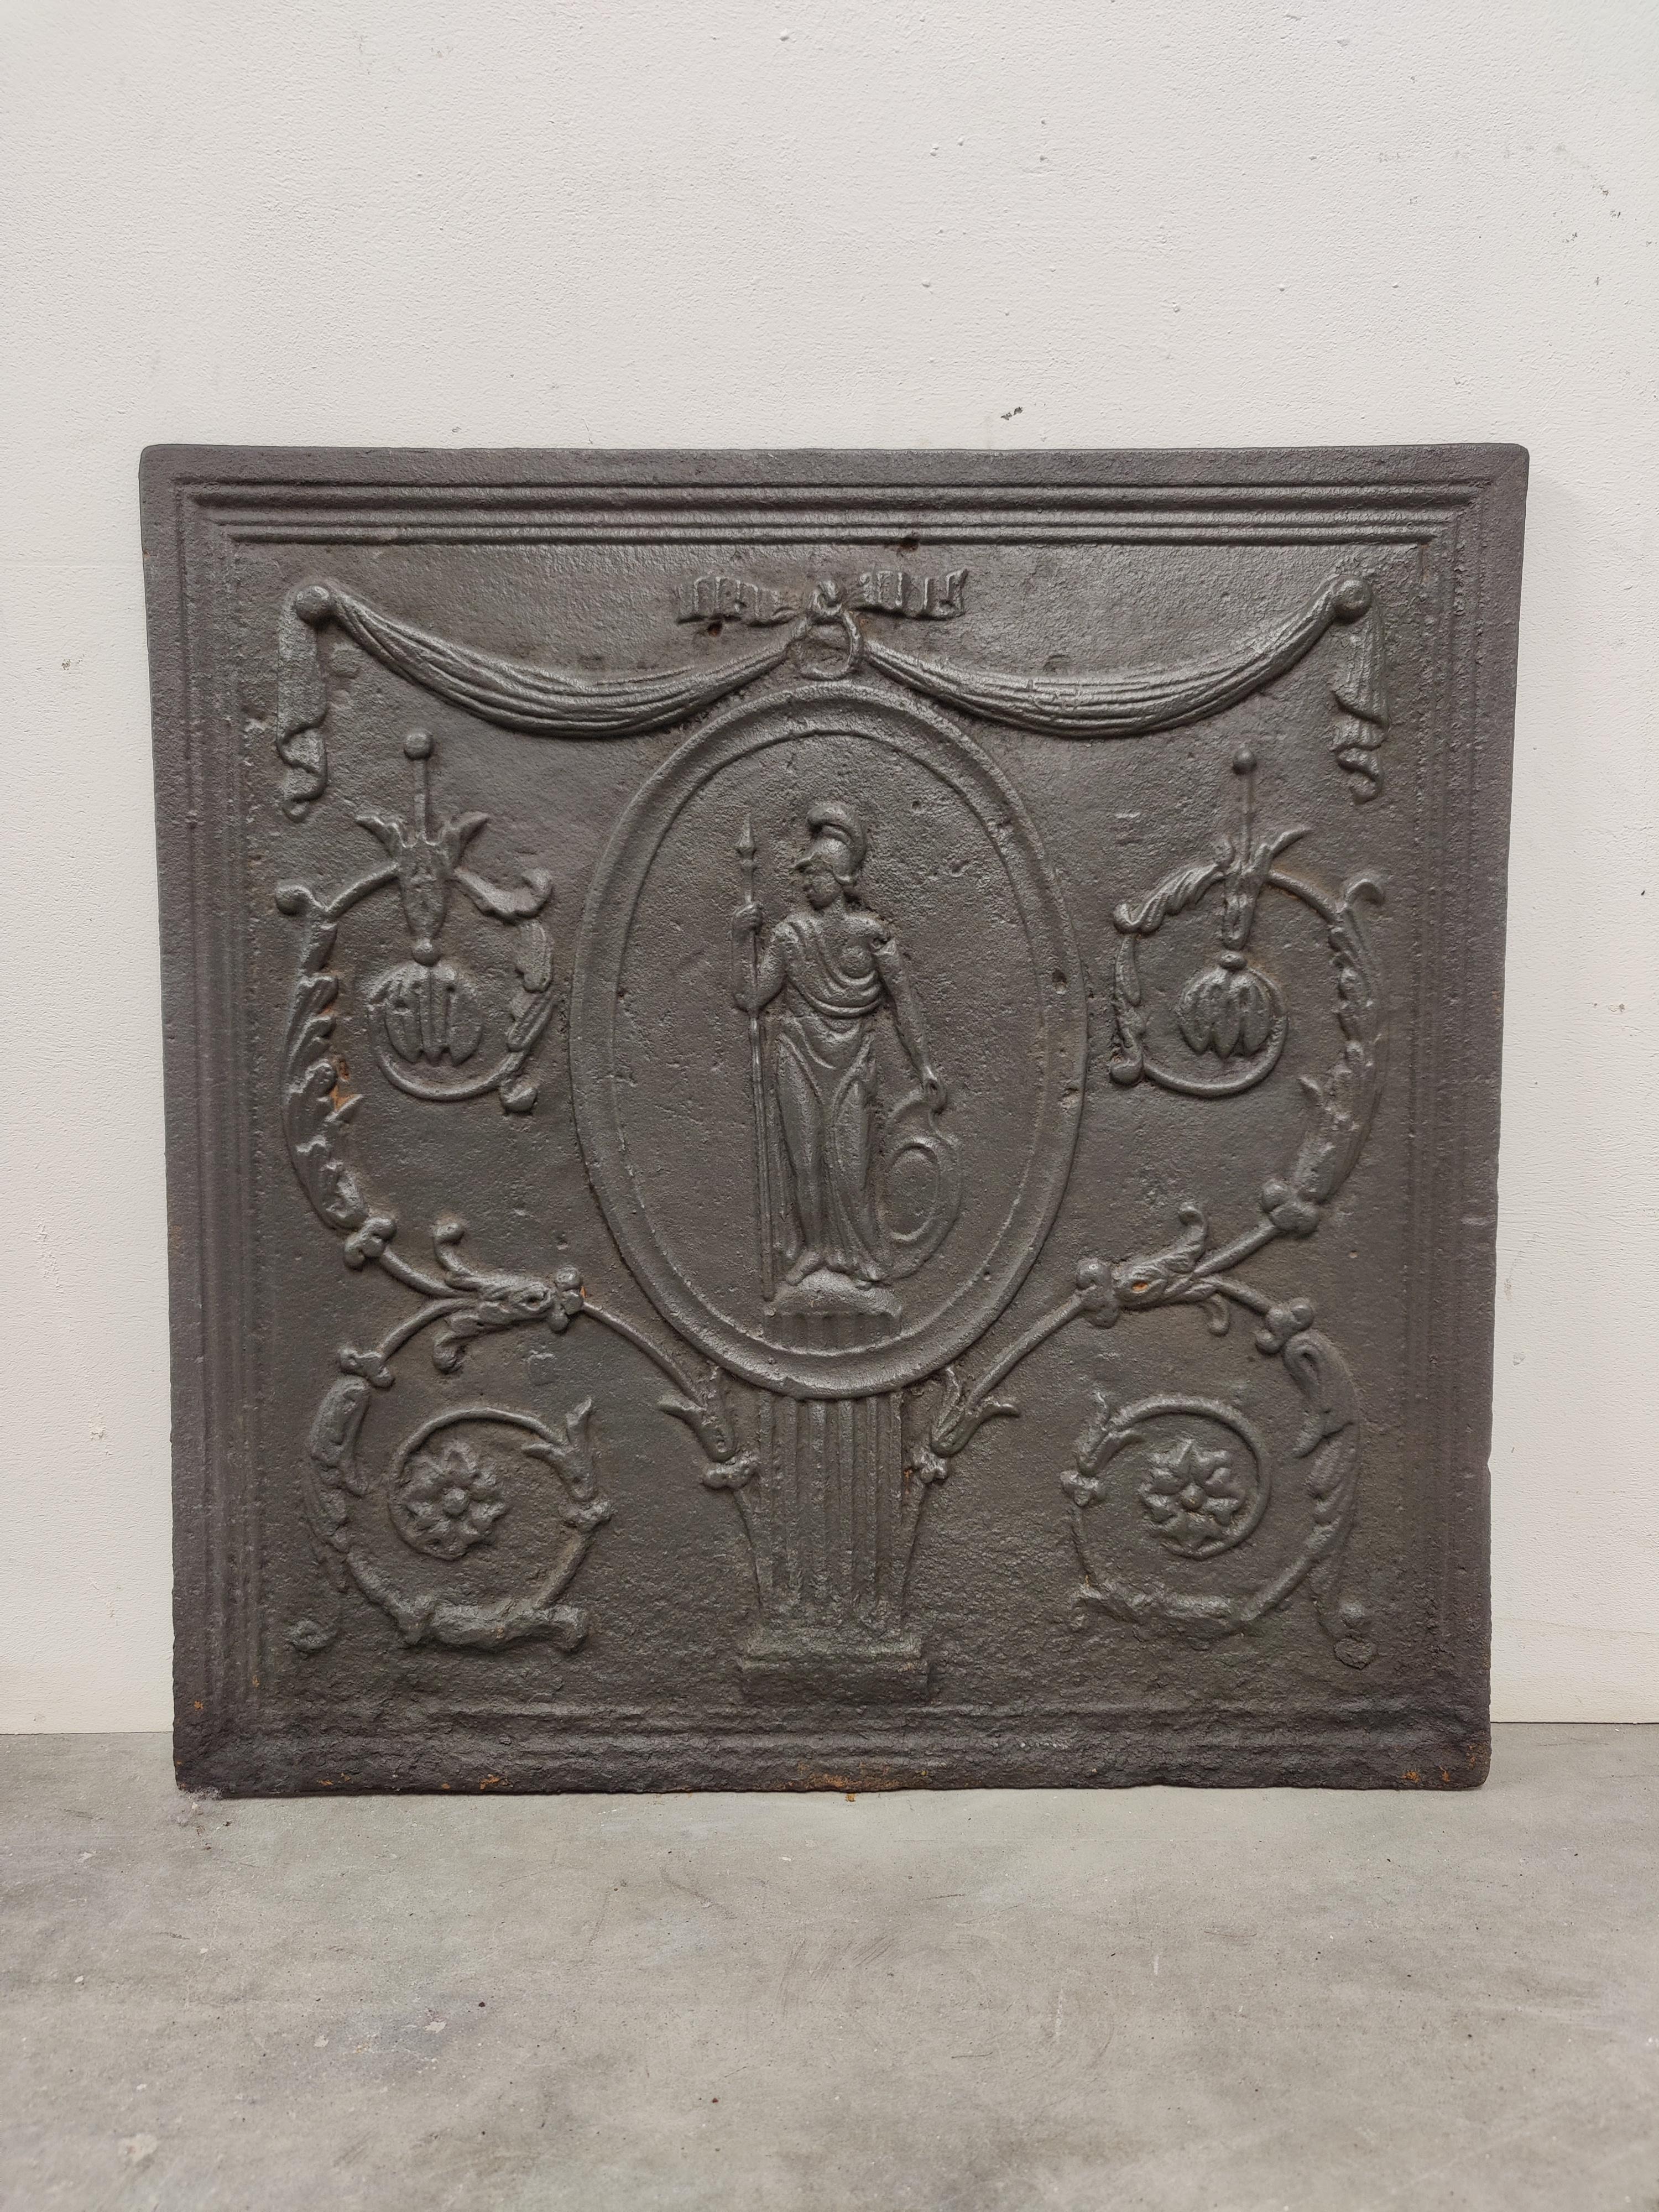 Antique fireback / backsplash, man with javelin.

Nice square cast iron antique fireback displaying a man holding a javelin.
Great condition, can be used in a real gas or log fire.
Very decorative piece.
51 lbs / 23 kg.

  
 